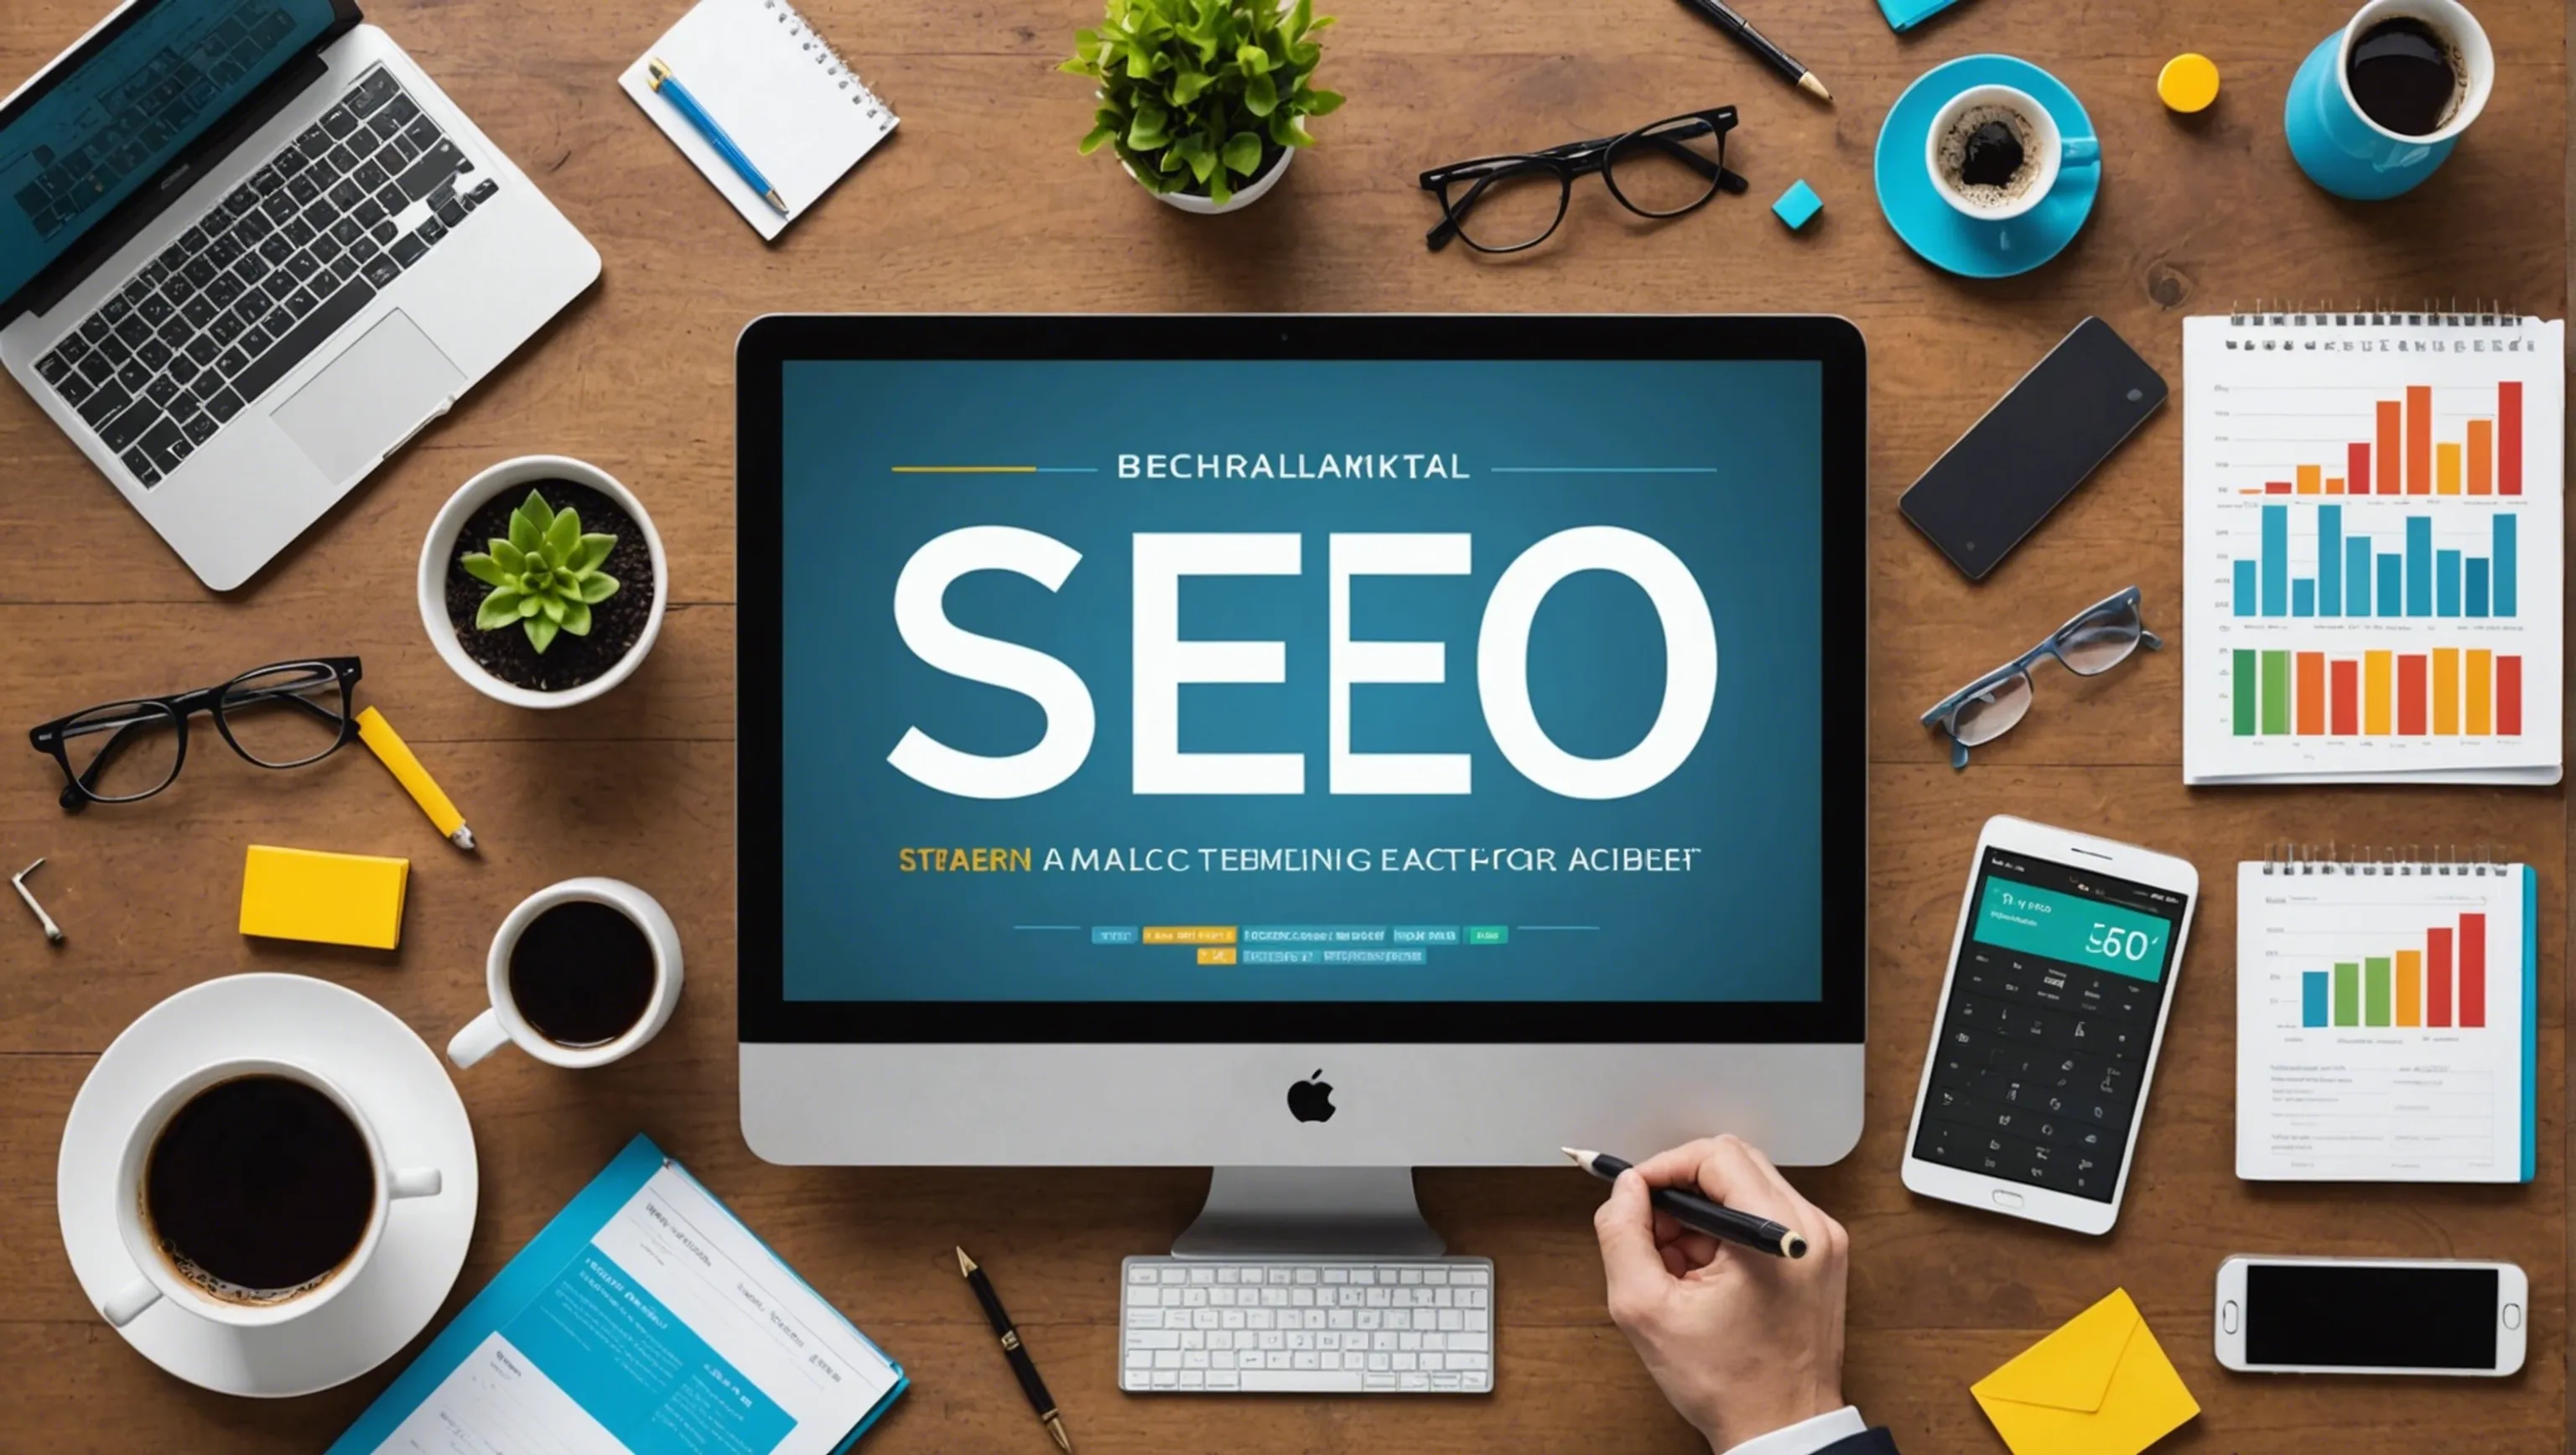 Importance of SEO benchmarking in marketing